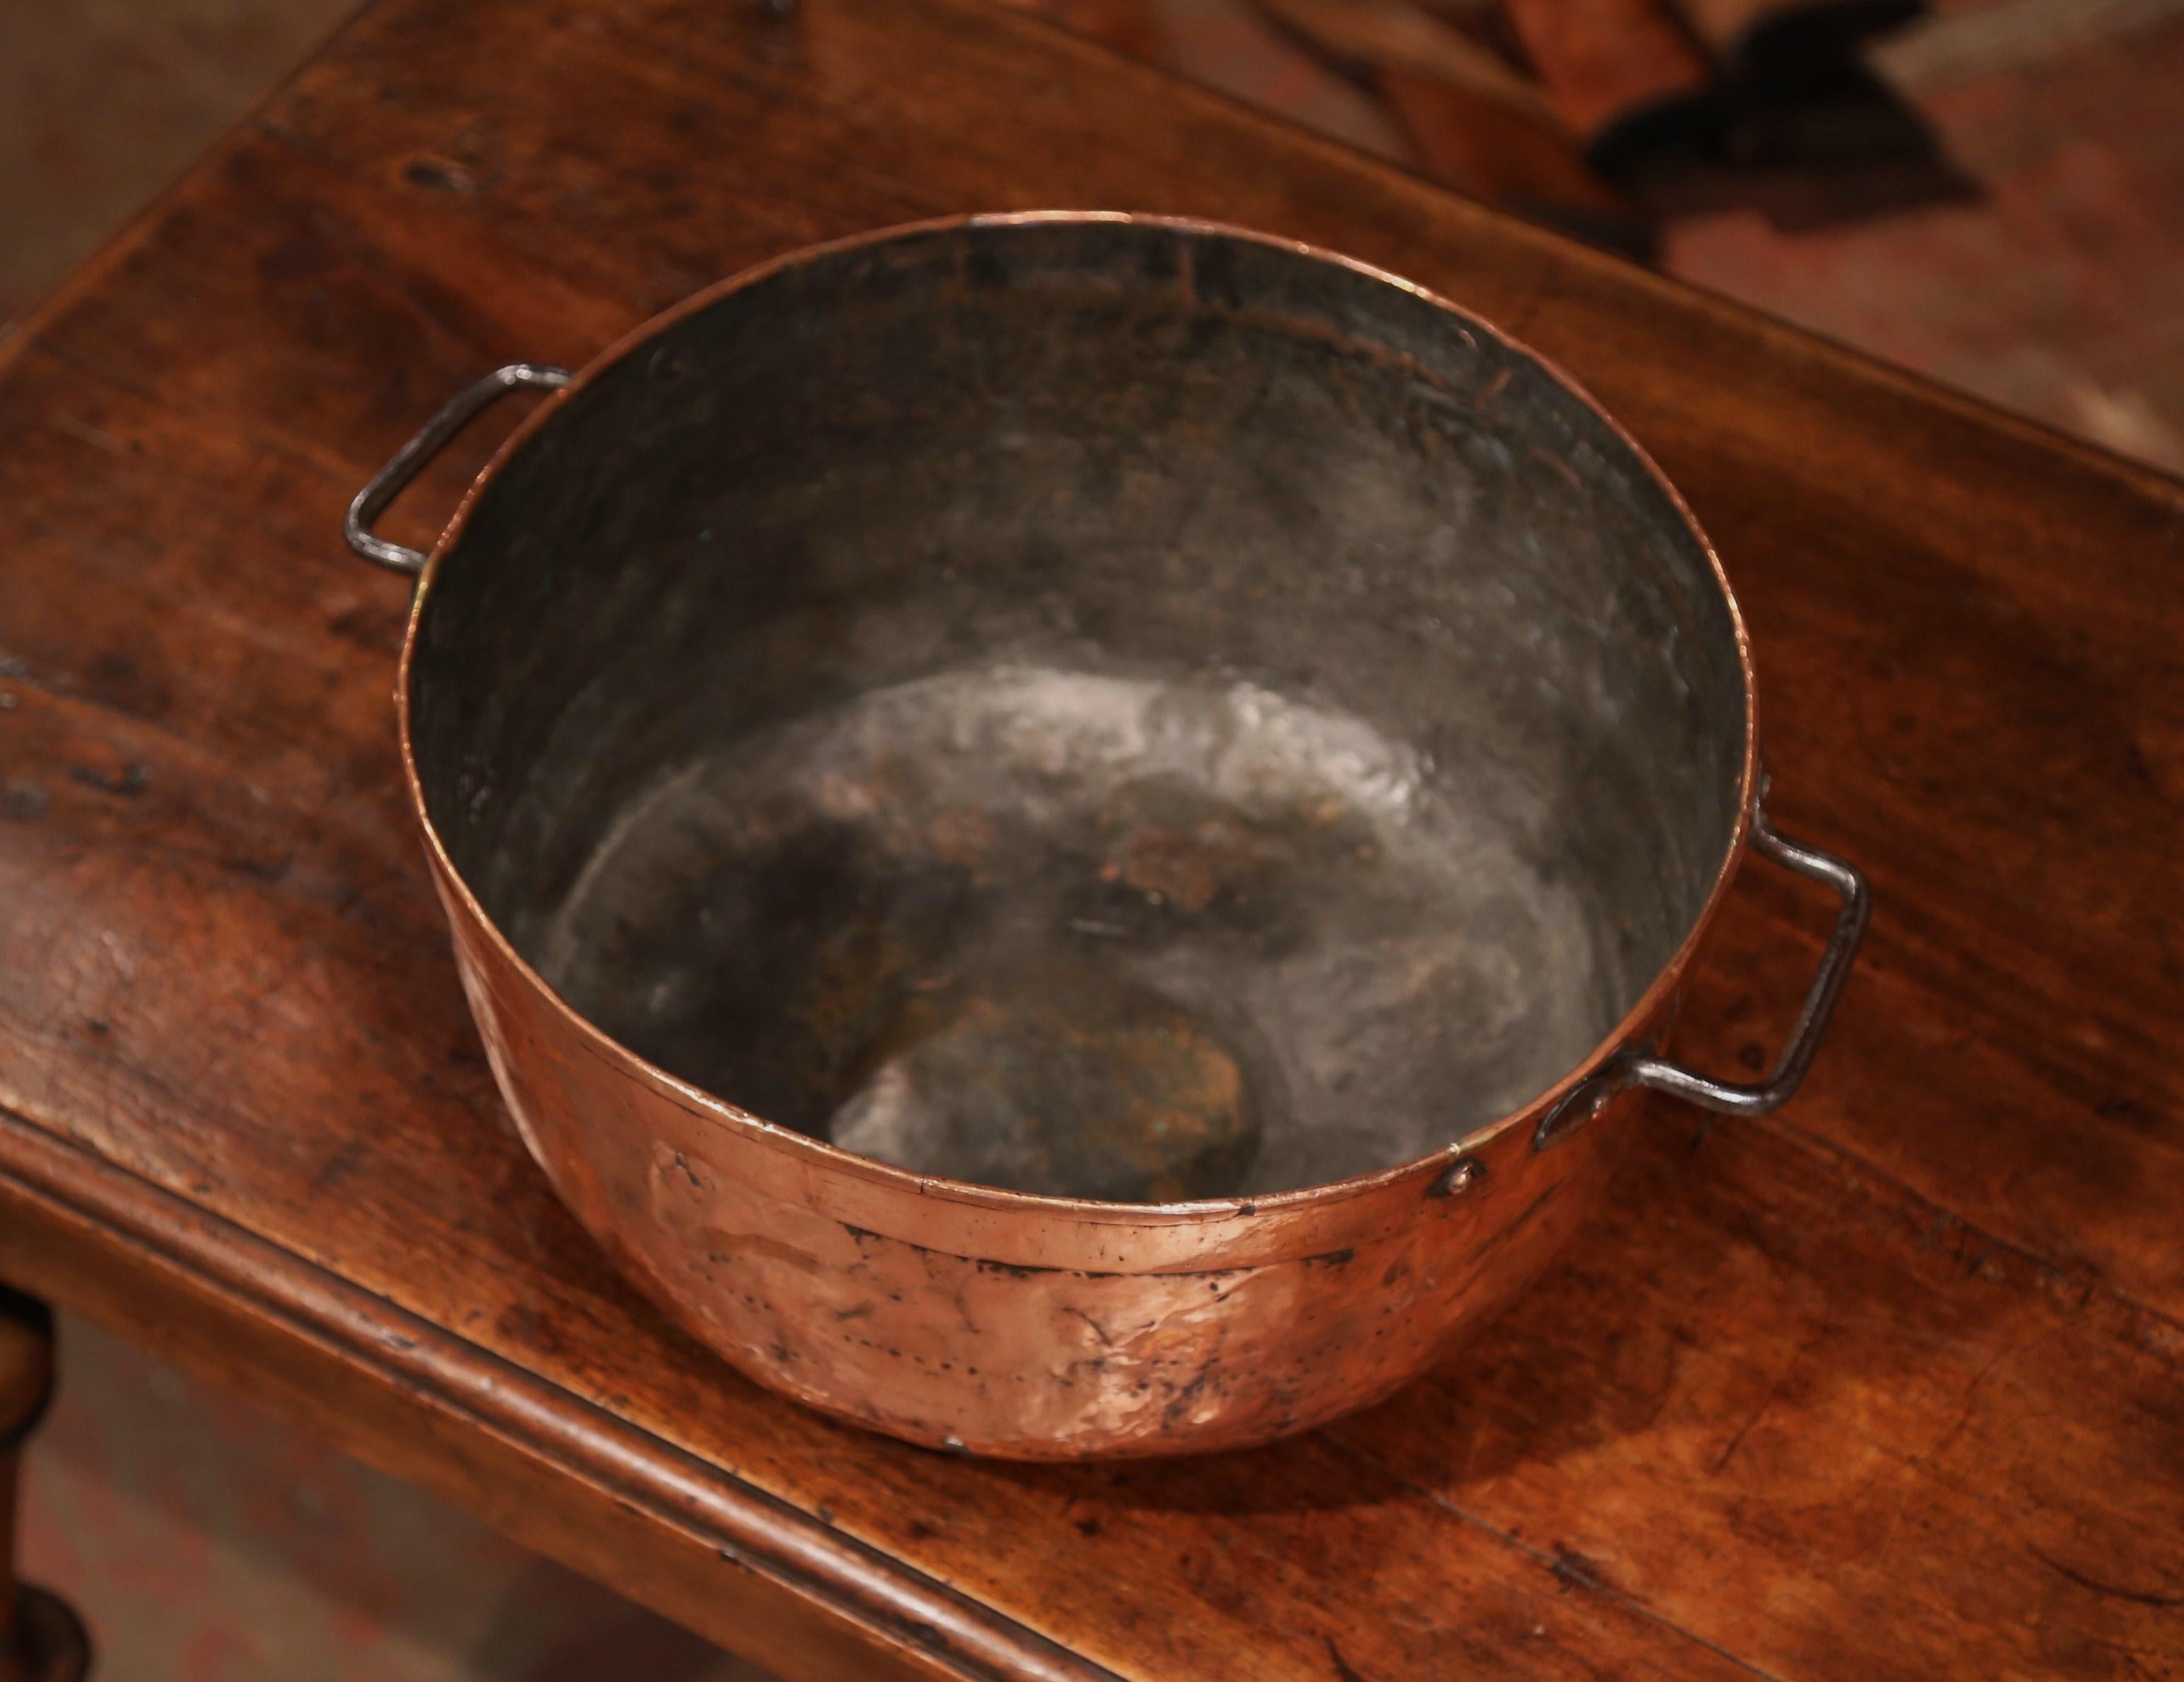 Forged Mid-19th Century French Copper Jelly and Jam Boiling Bowl with Handles